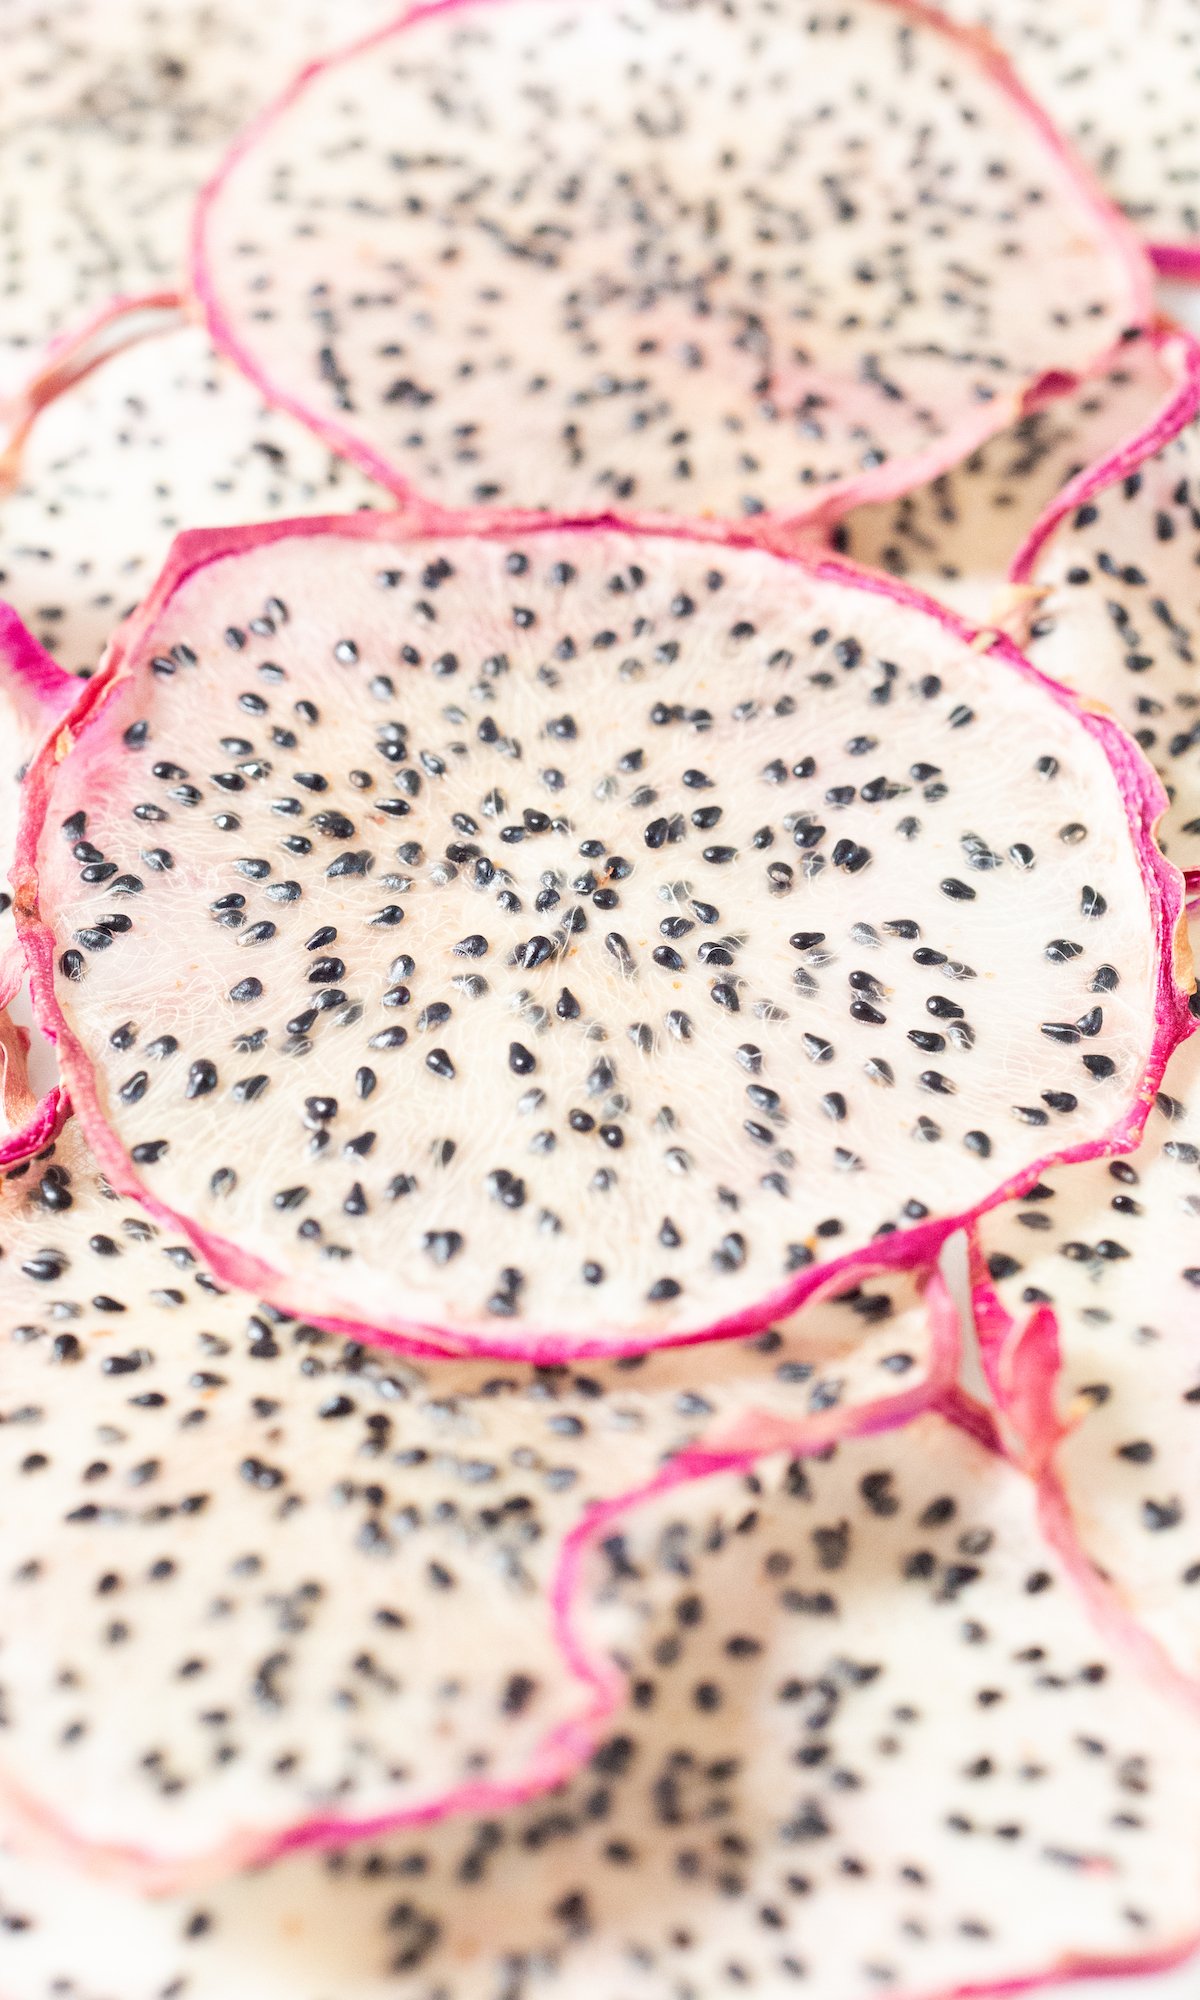 Dozens of slices of dehydrated dragon fruit on a white platter.